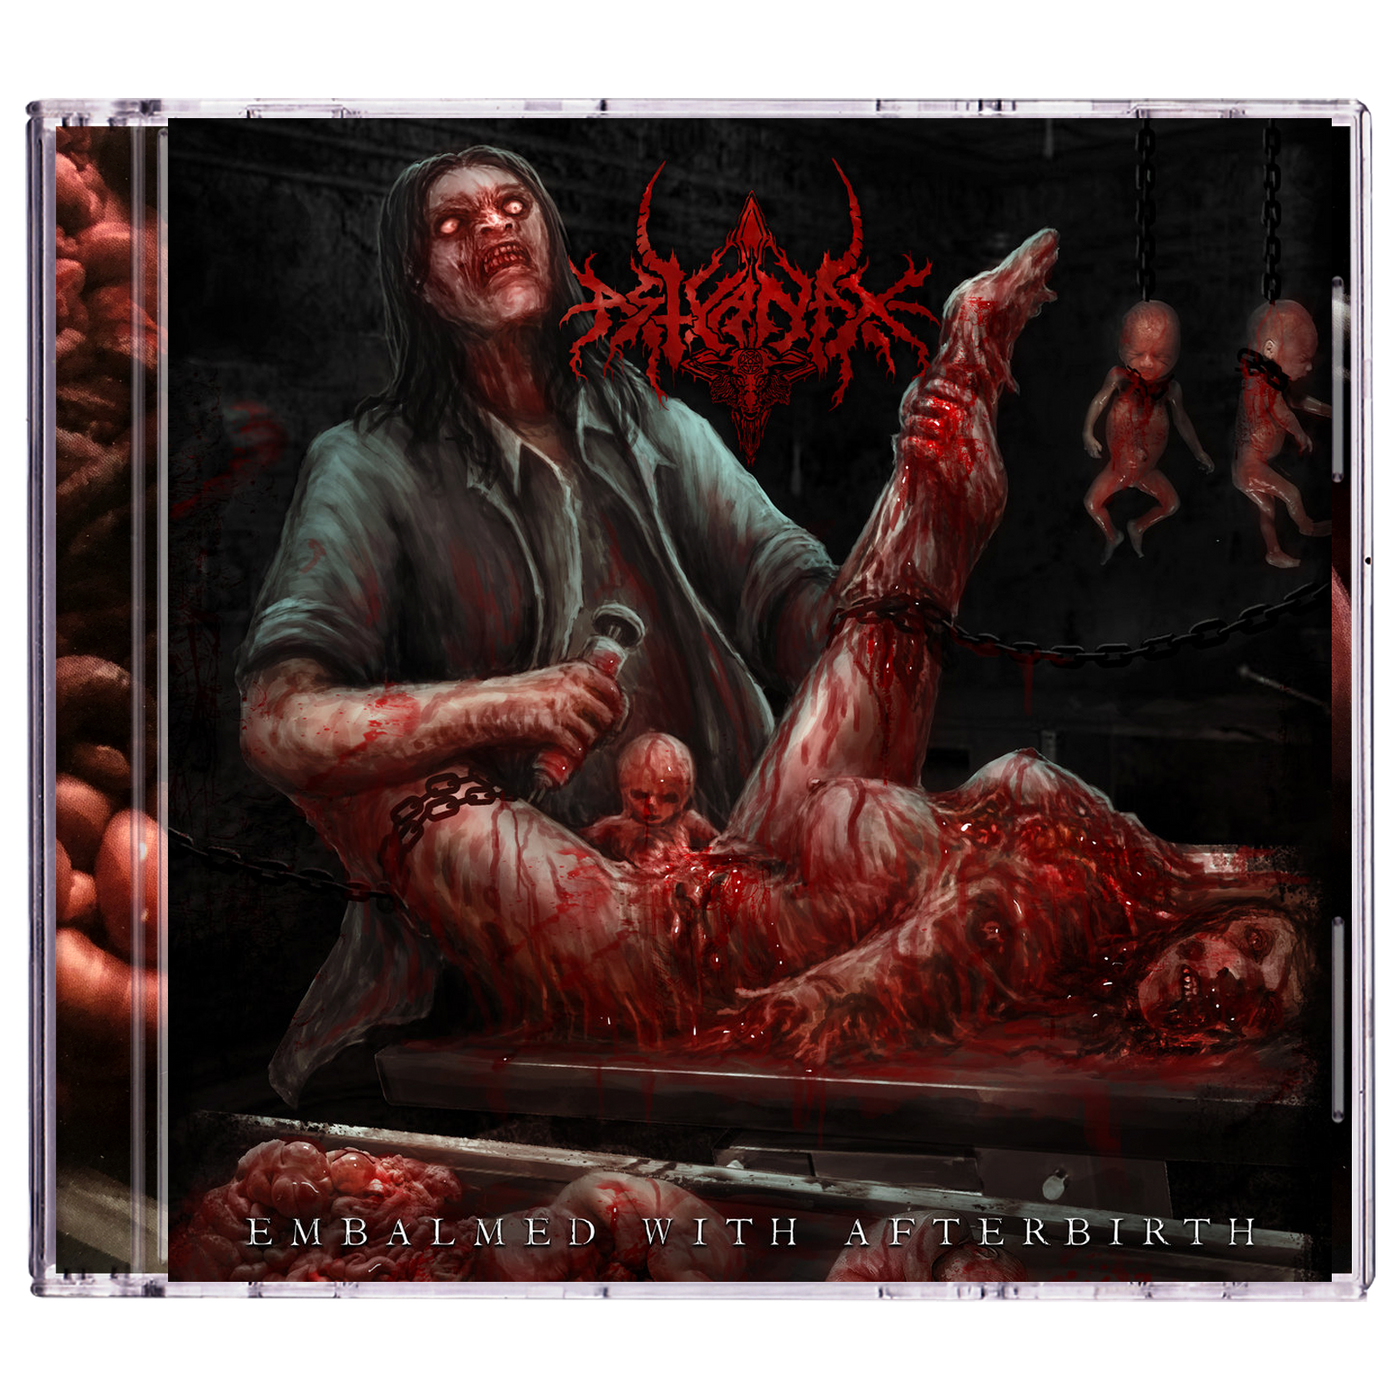 Astyanax 'Embalmed With Afterbirth' CD